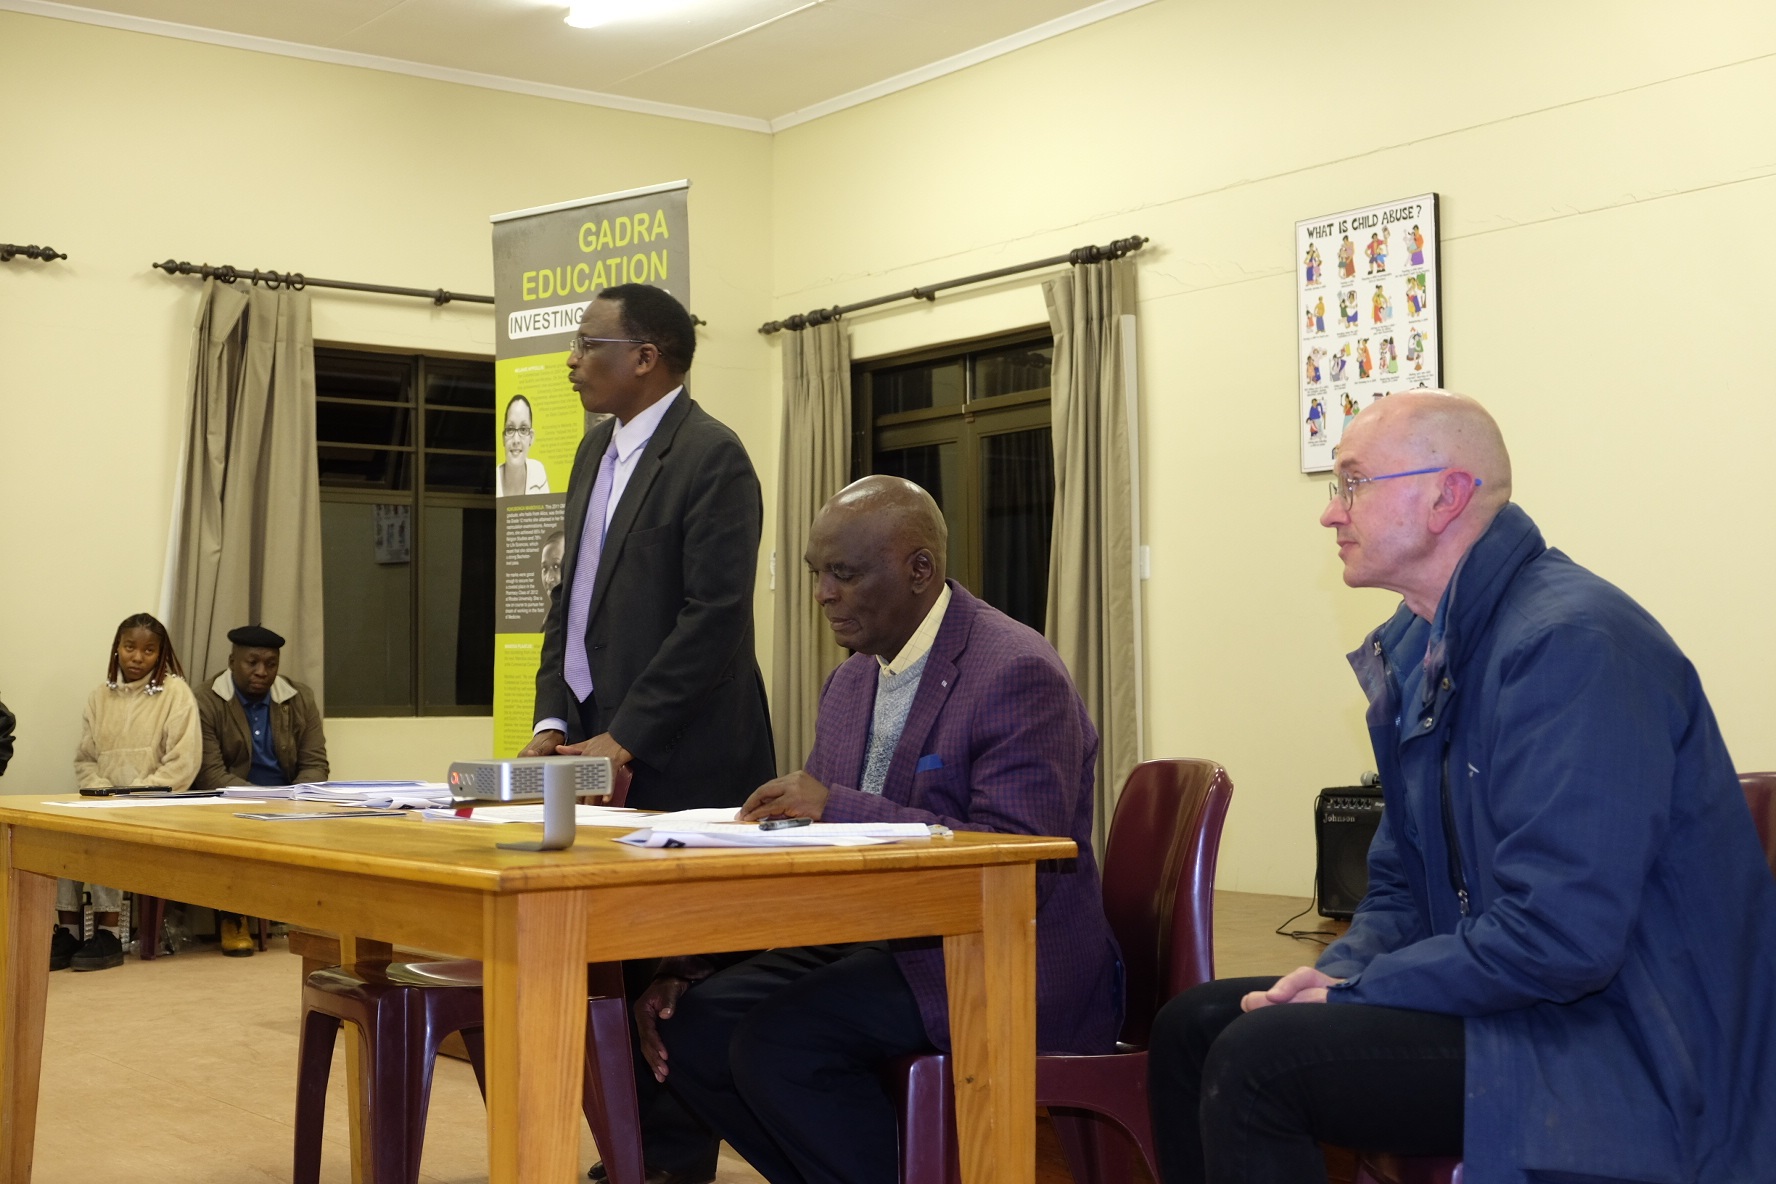 Rhodes University Vice Chancellor Prof Sizwe Mabizela addresses the GADRA Education AGM in Joza on Tuesday, 23 May. To his right are GADRA Education Board chairperson Prof Ken Ngcoza and GADRA Education Manager Dr Ashley Westaway. Photo: Rod Amner